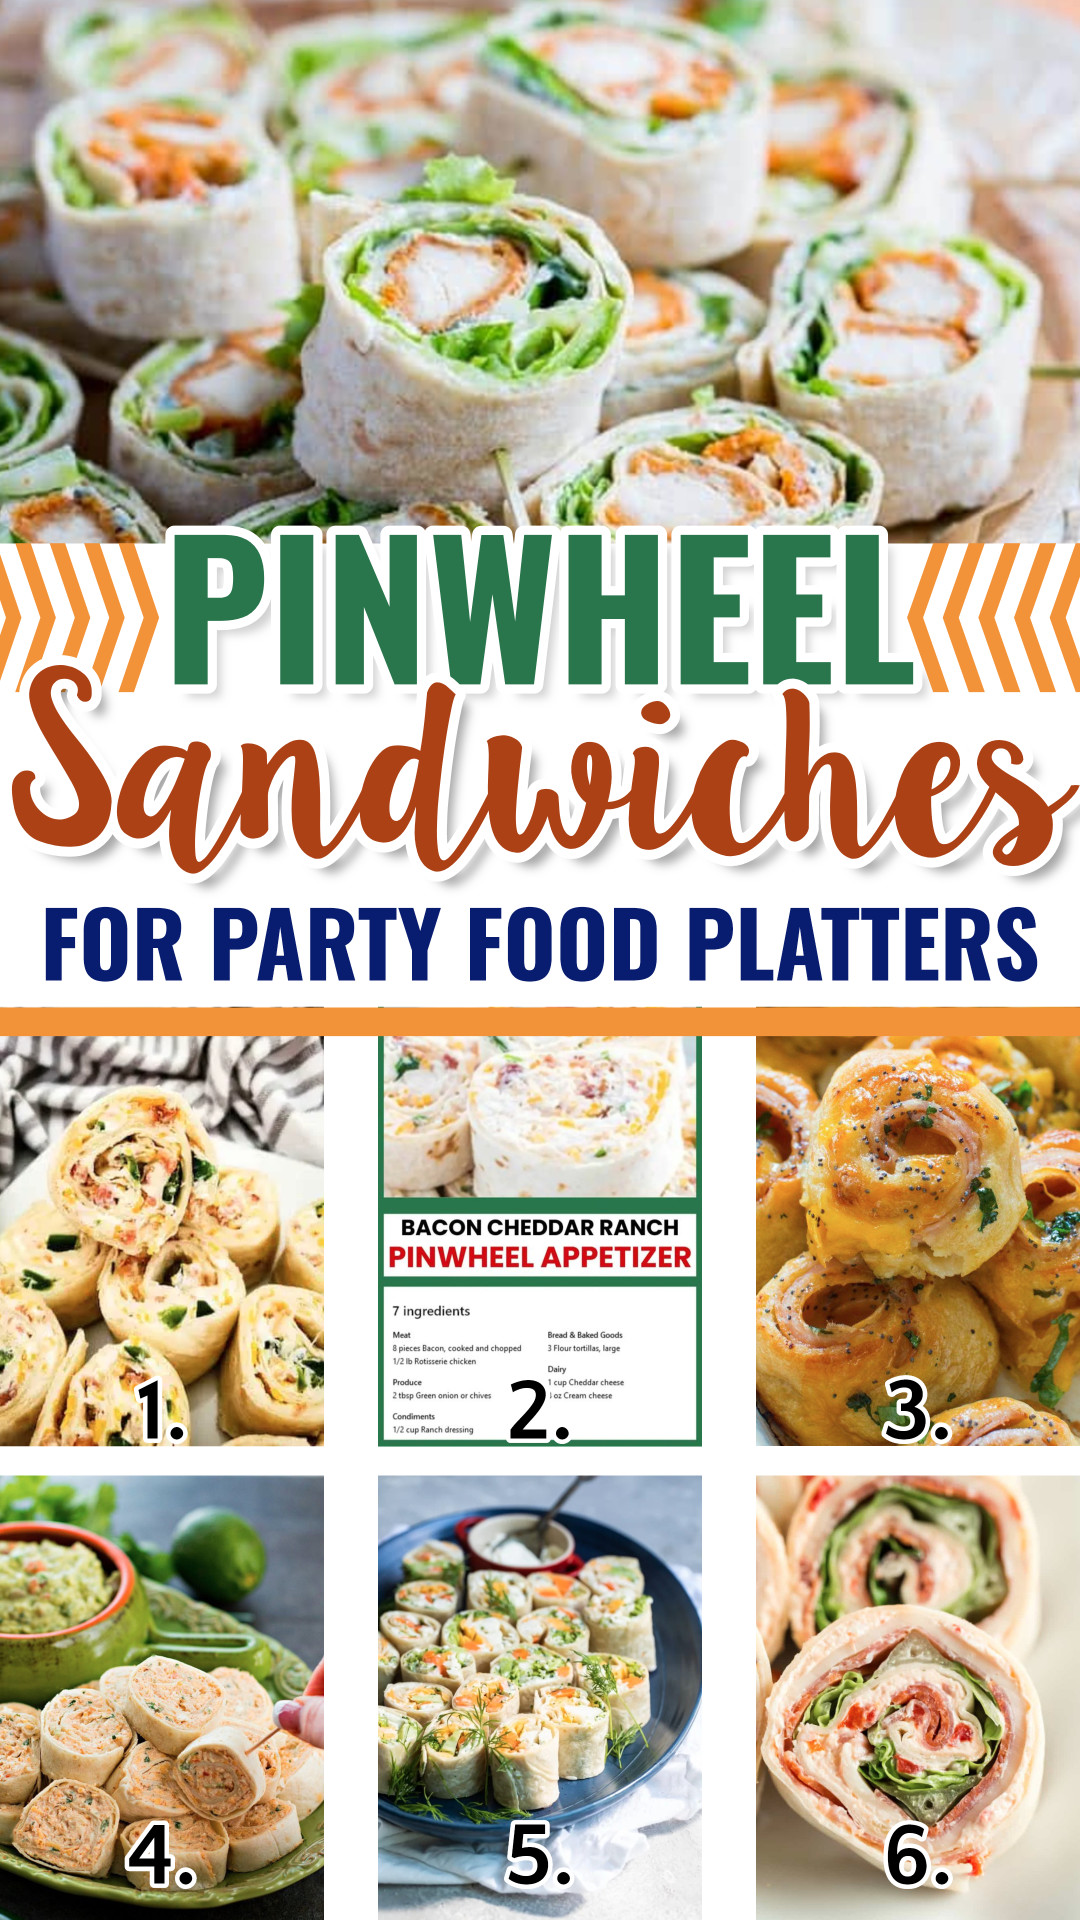 pinwwheel sandwiches for party food platters